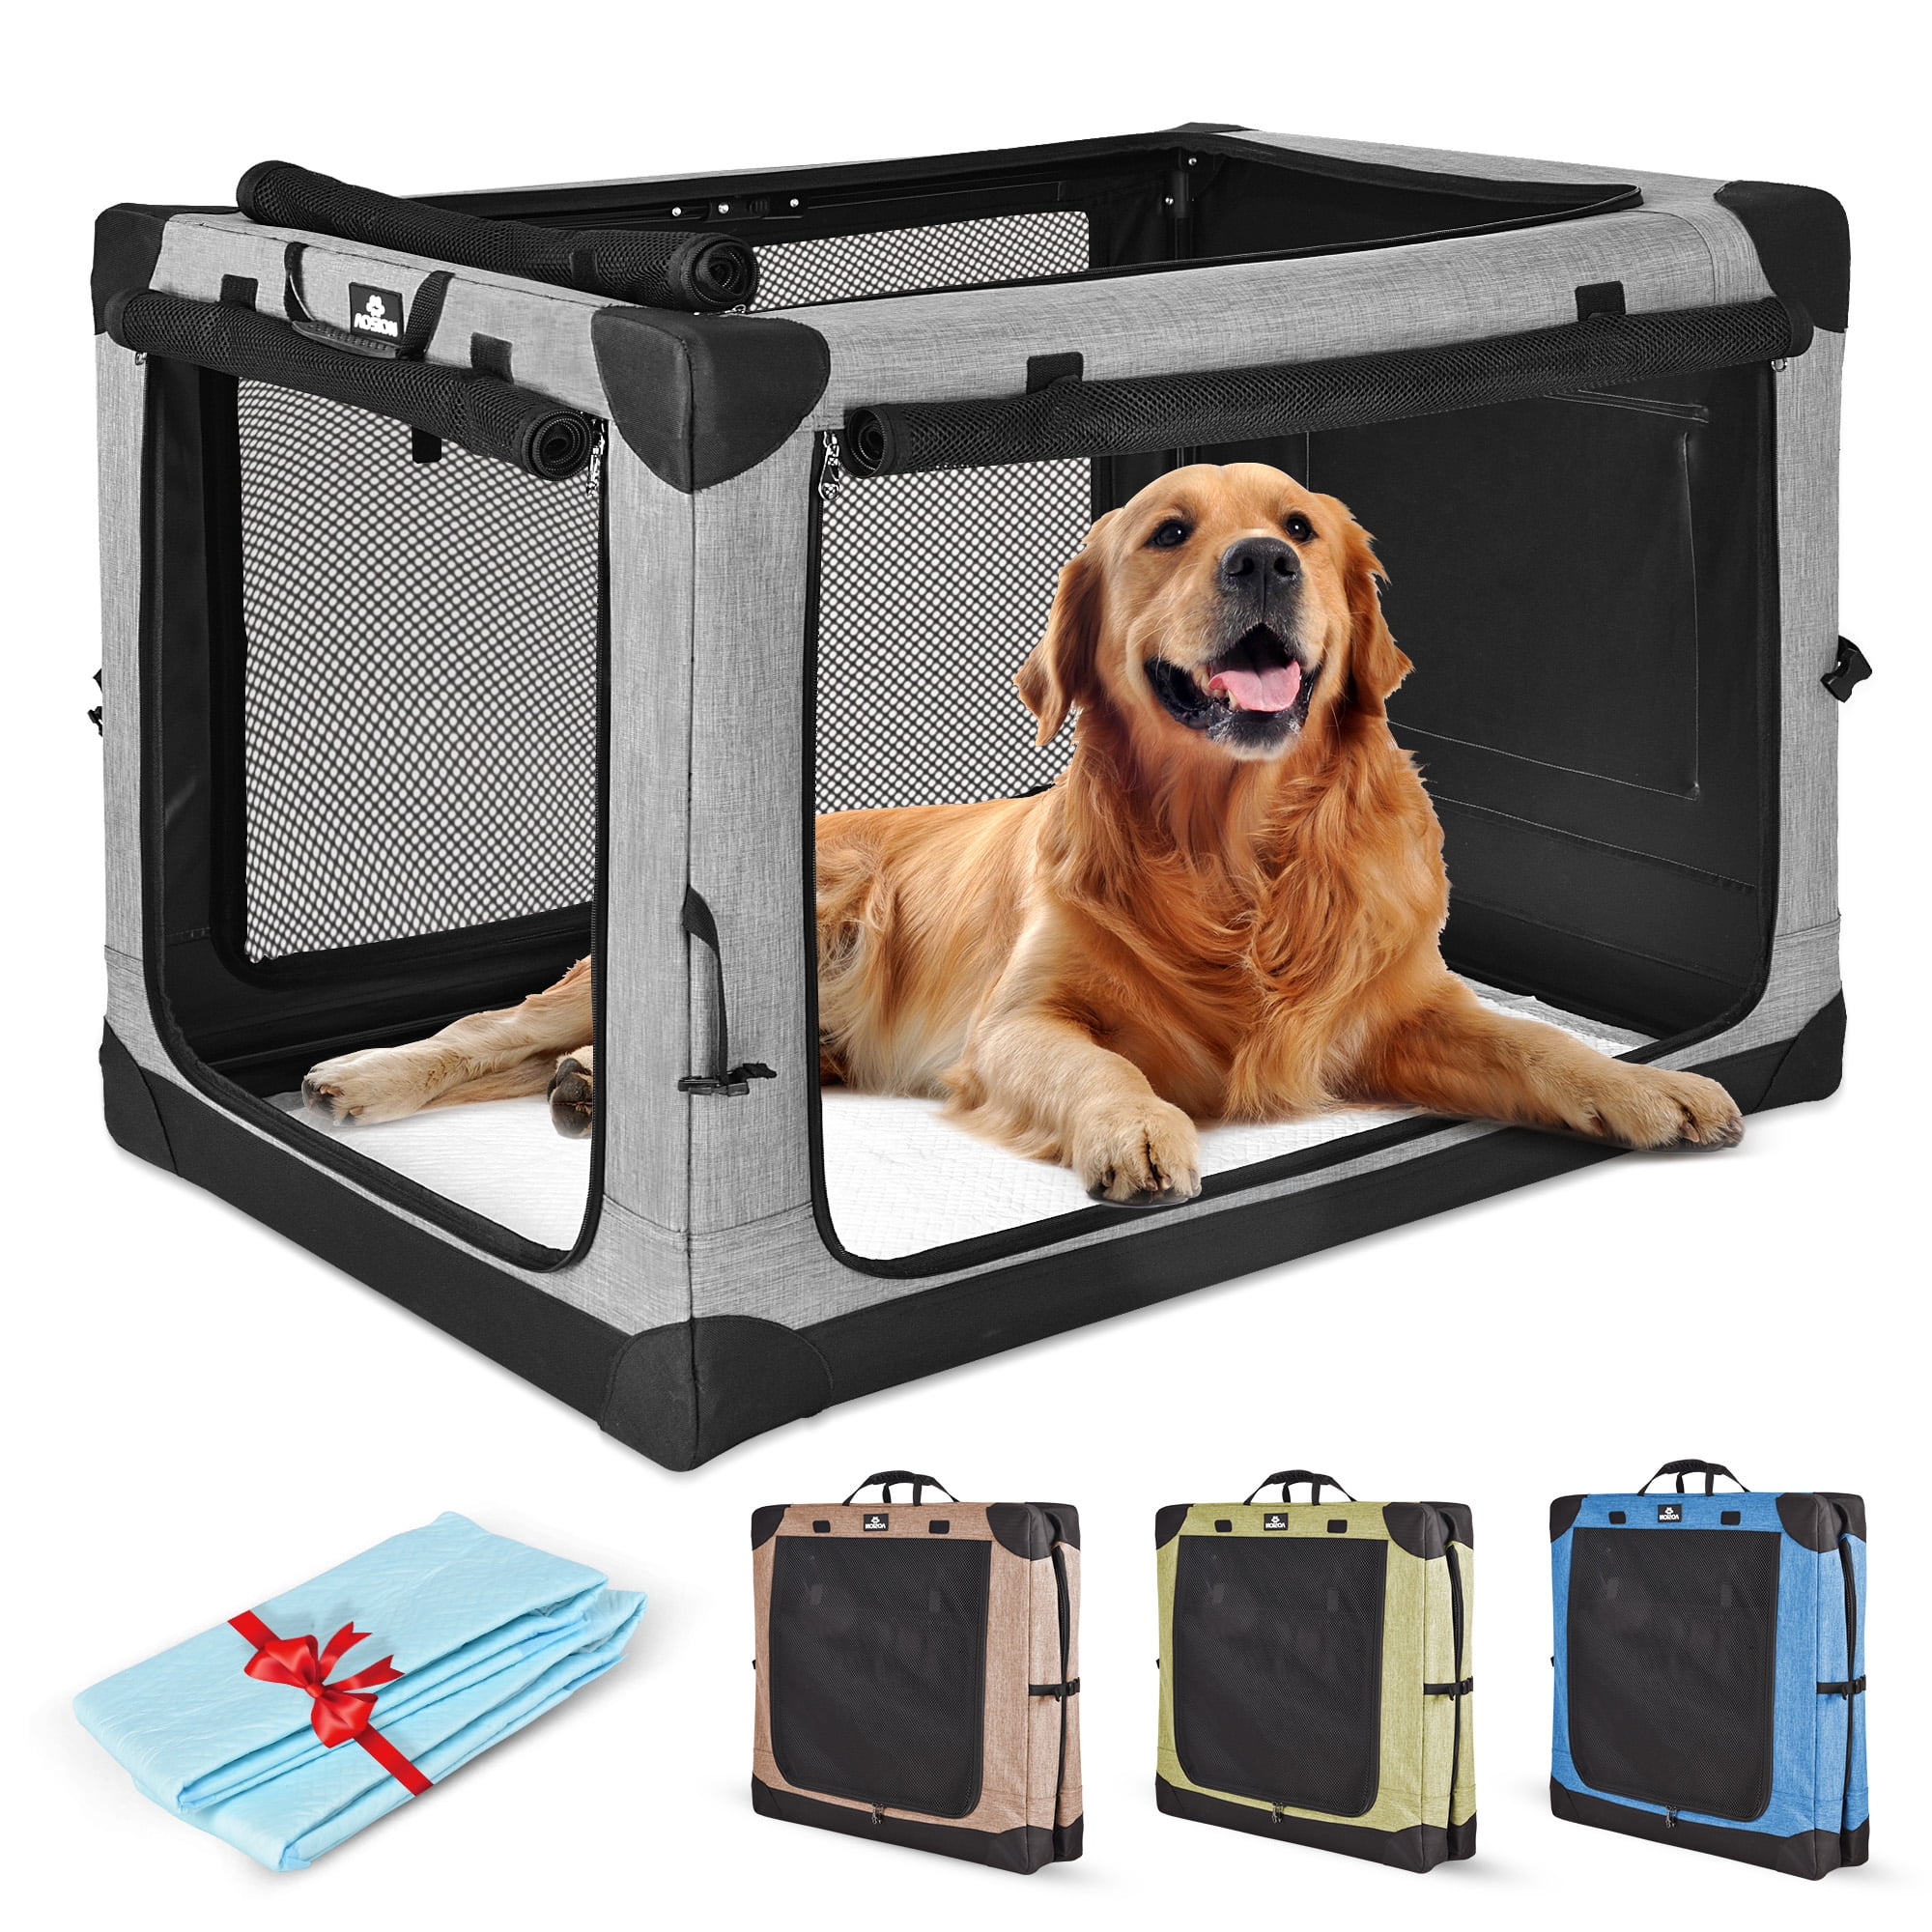 32 Collapsible Dog Crate, Dog Travel Crate,Portable Dog Crate,4 Door Soft Dog  Crate with Soft Mat, Pet Kennel for Medium Dogs, Indoor, Outdoor, Travel,  Training (Grey) 